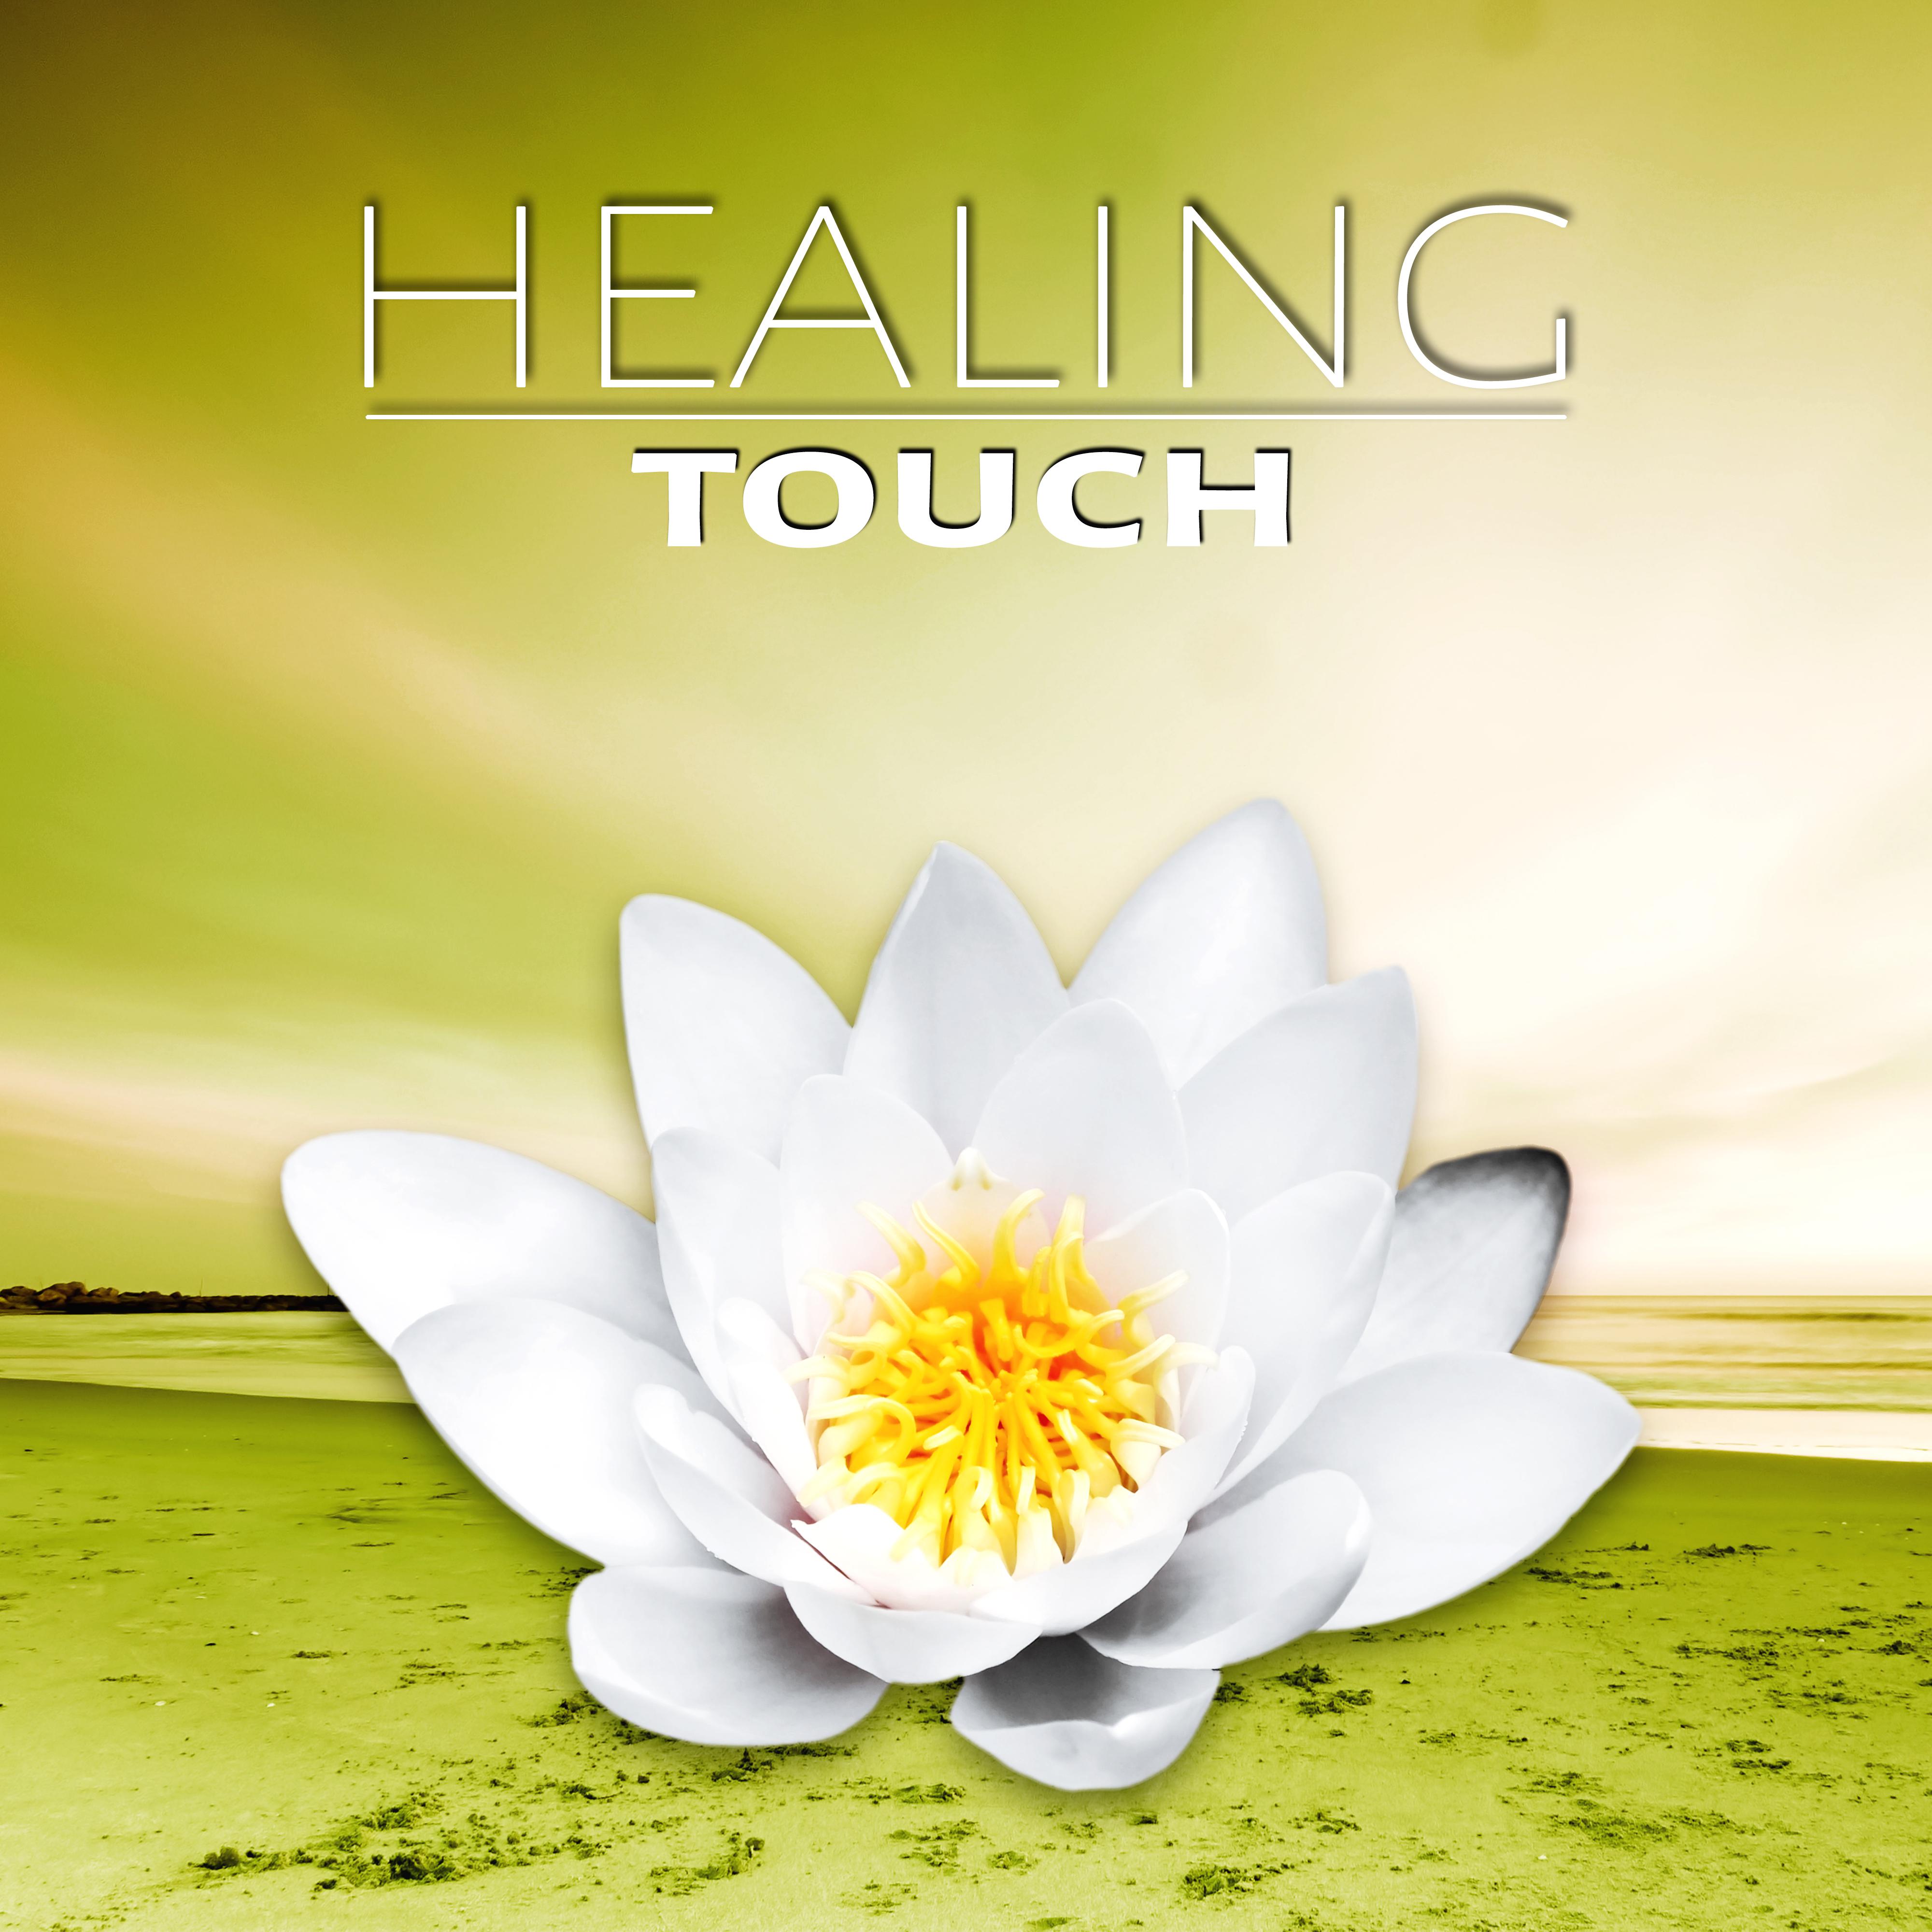 Healing Touch - Chillout with Piano Music, Soothing Piano Music Therapy, Health & Healing Relaxation